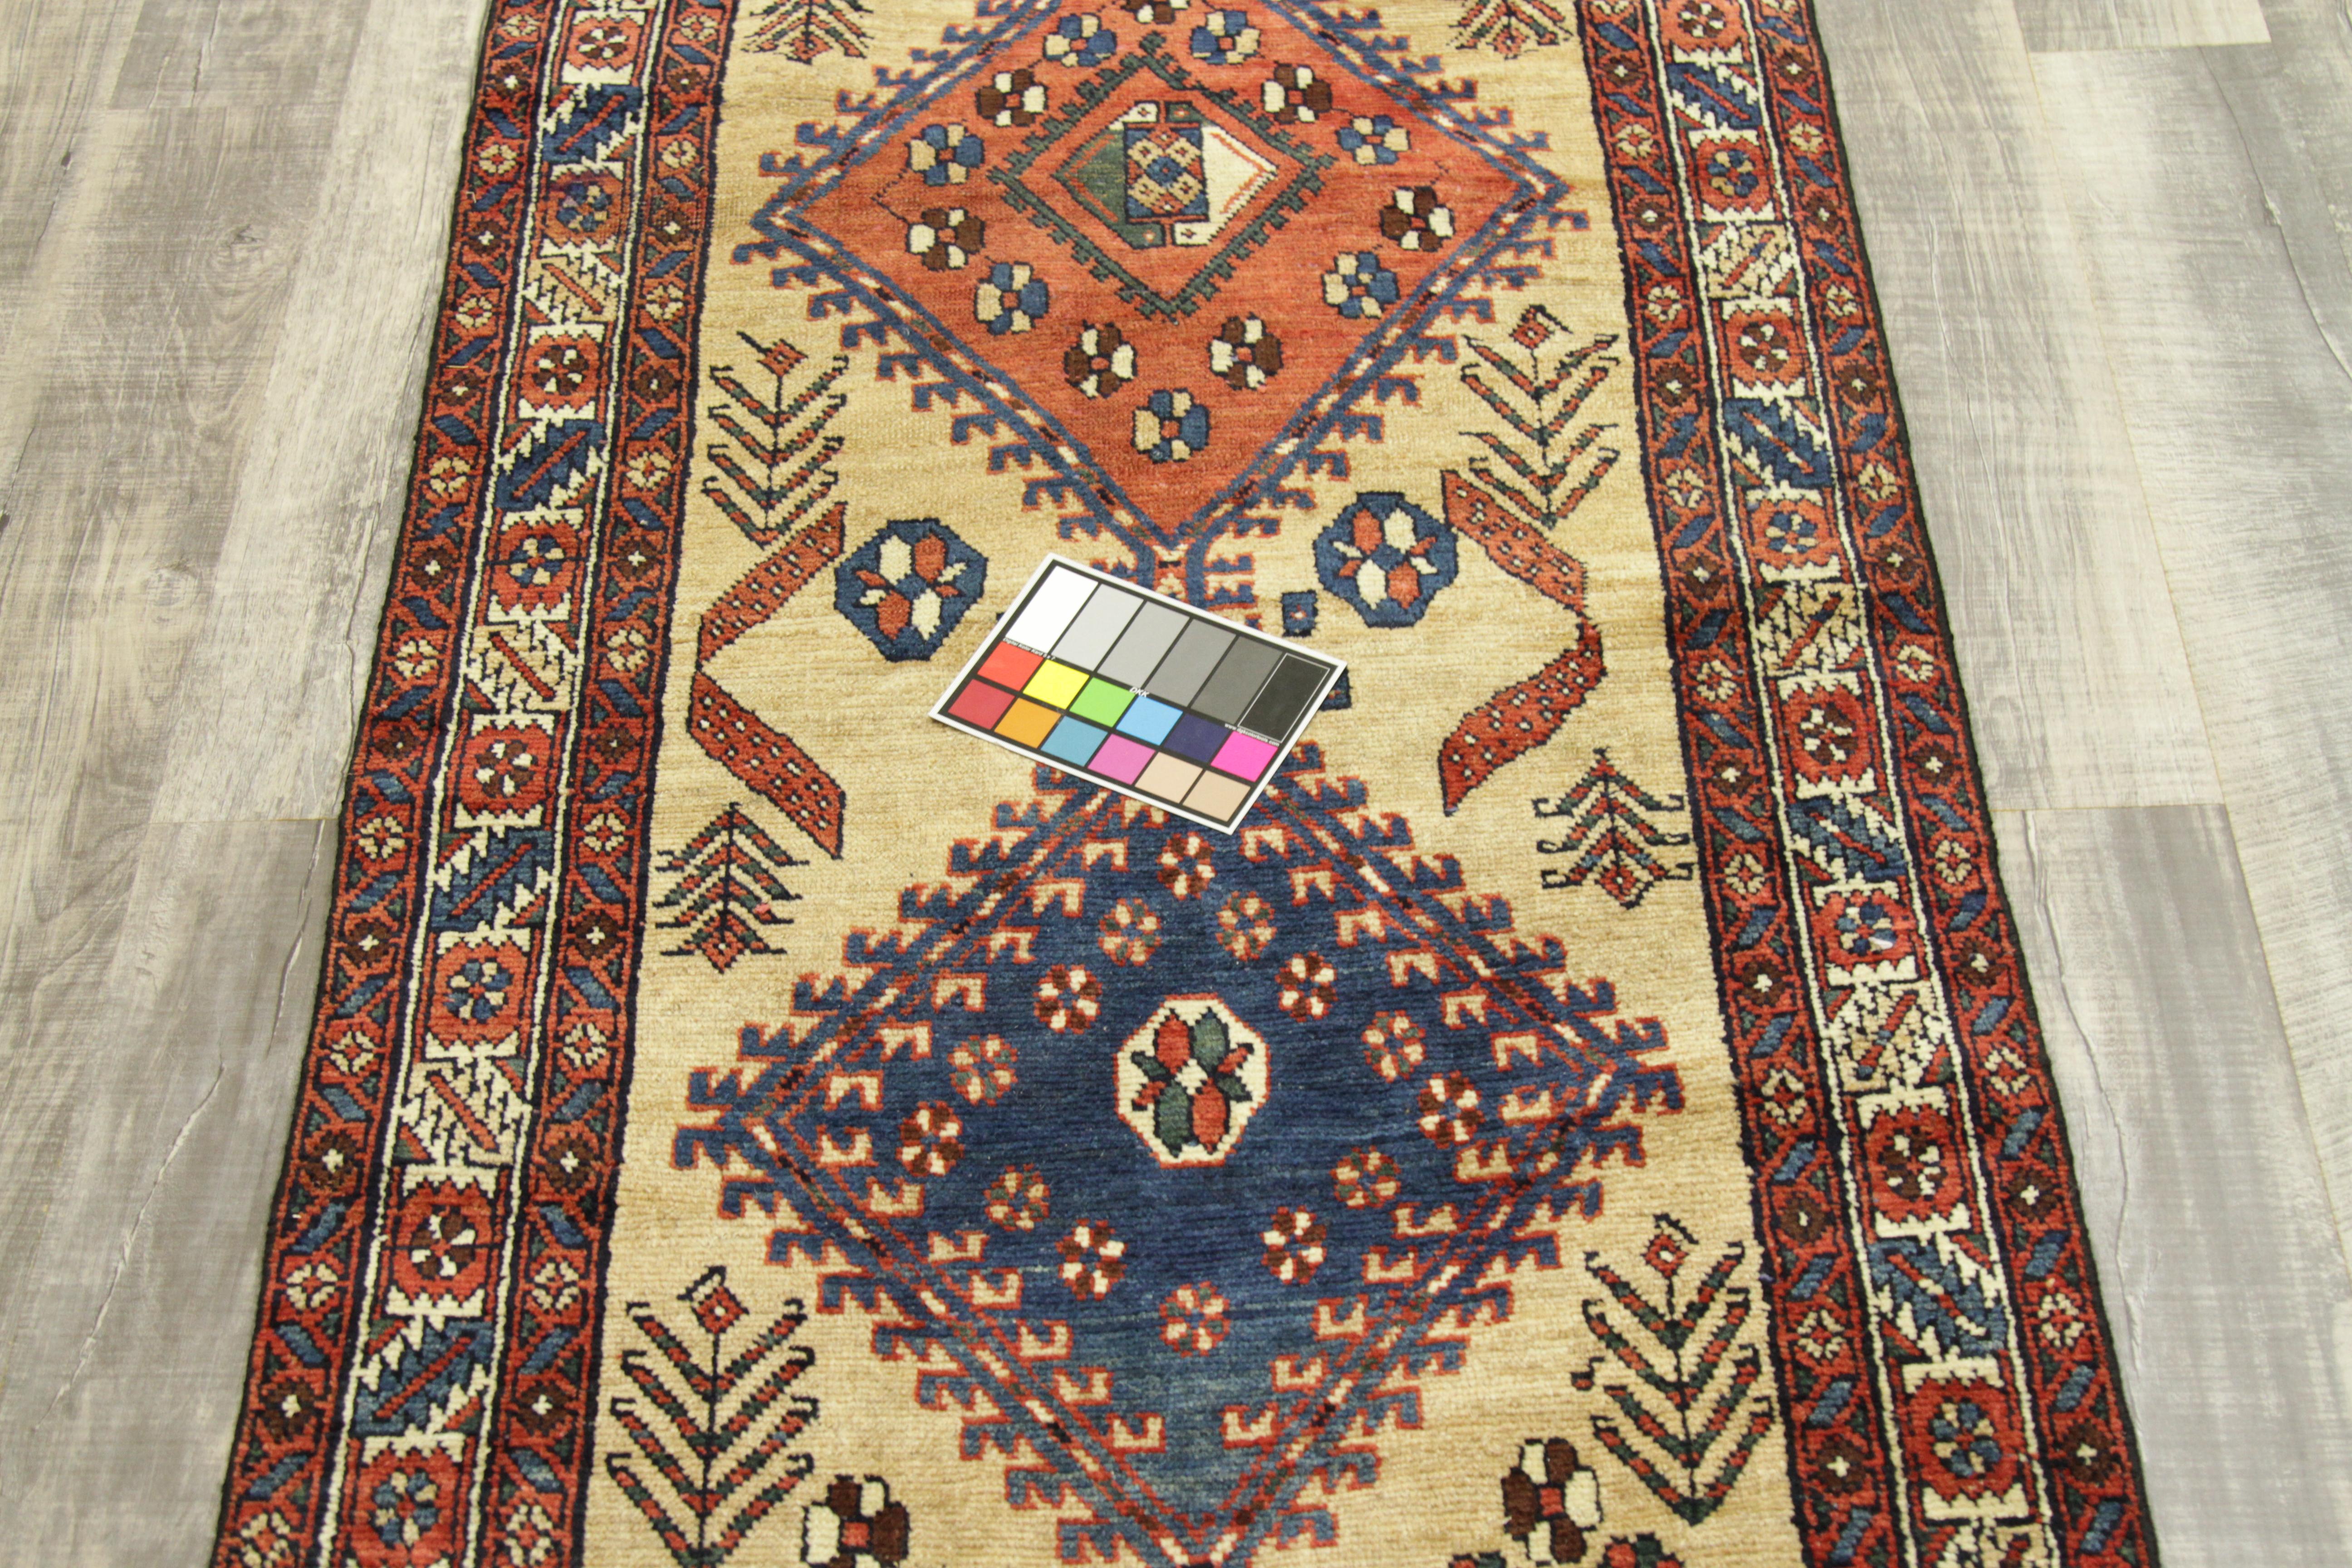 Mid-20th Century Antique Persian Rug in Azerbaijan Design with Fine Camel Hair Backing For Sale